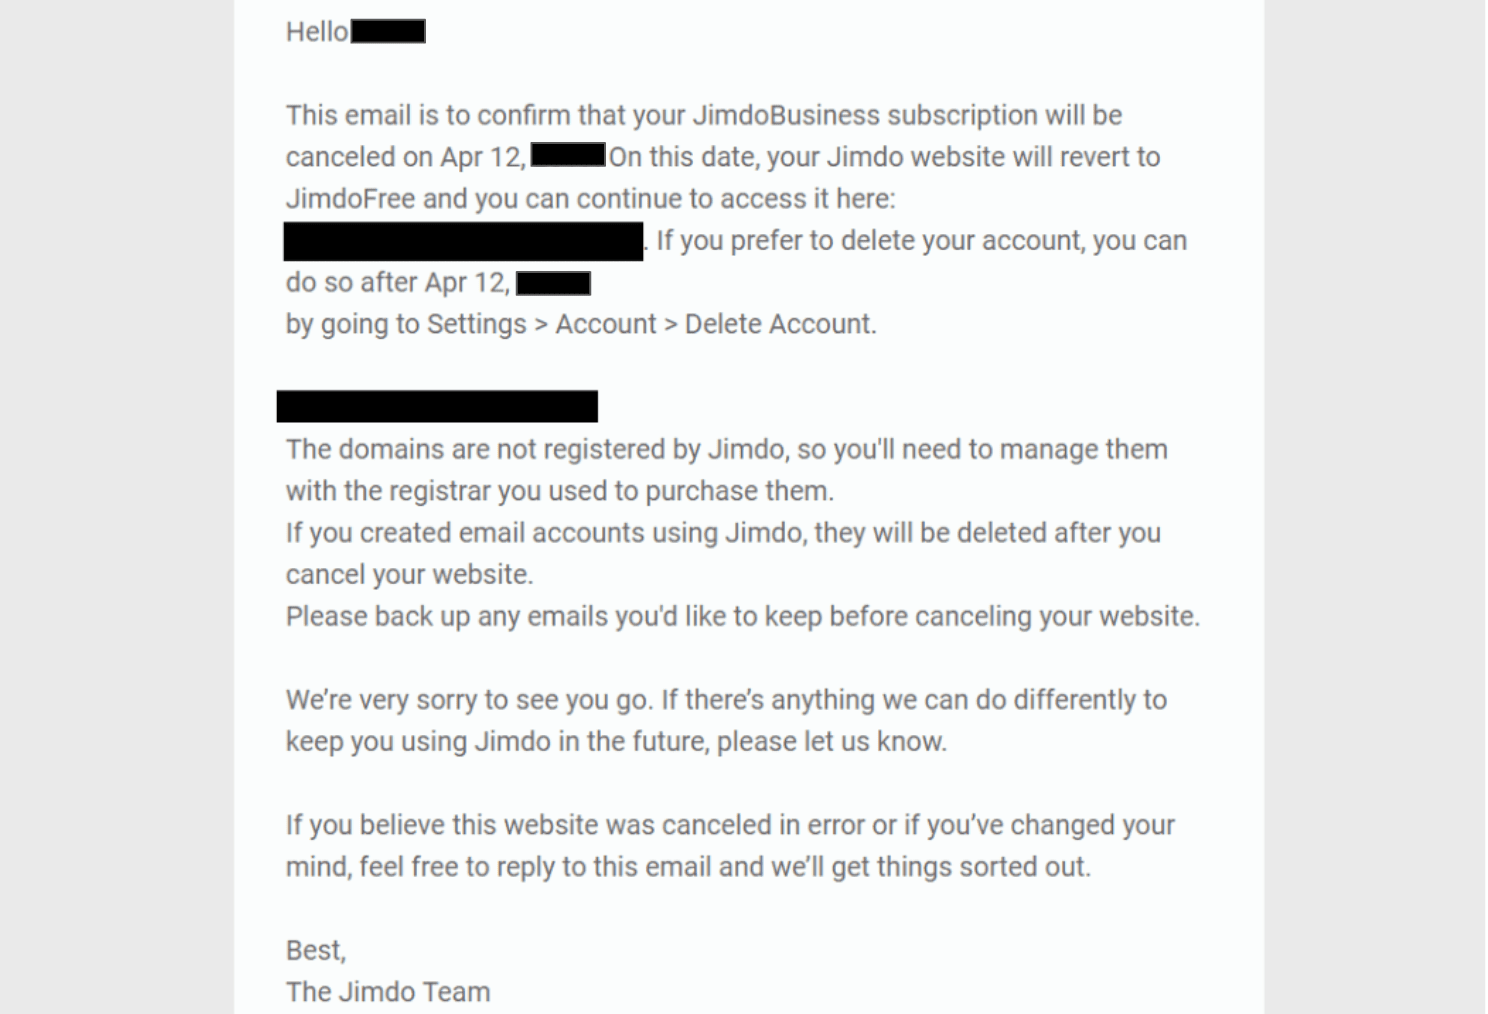 How to Cancel Your Account with Jimdo and Get a Refund